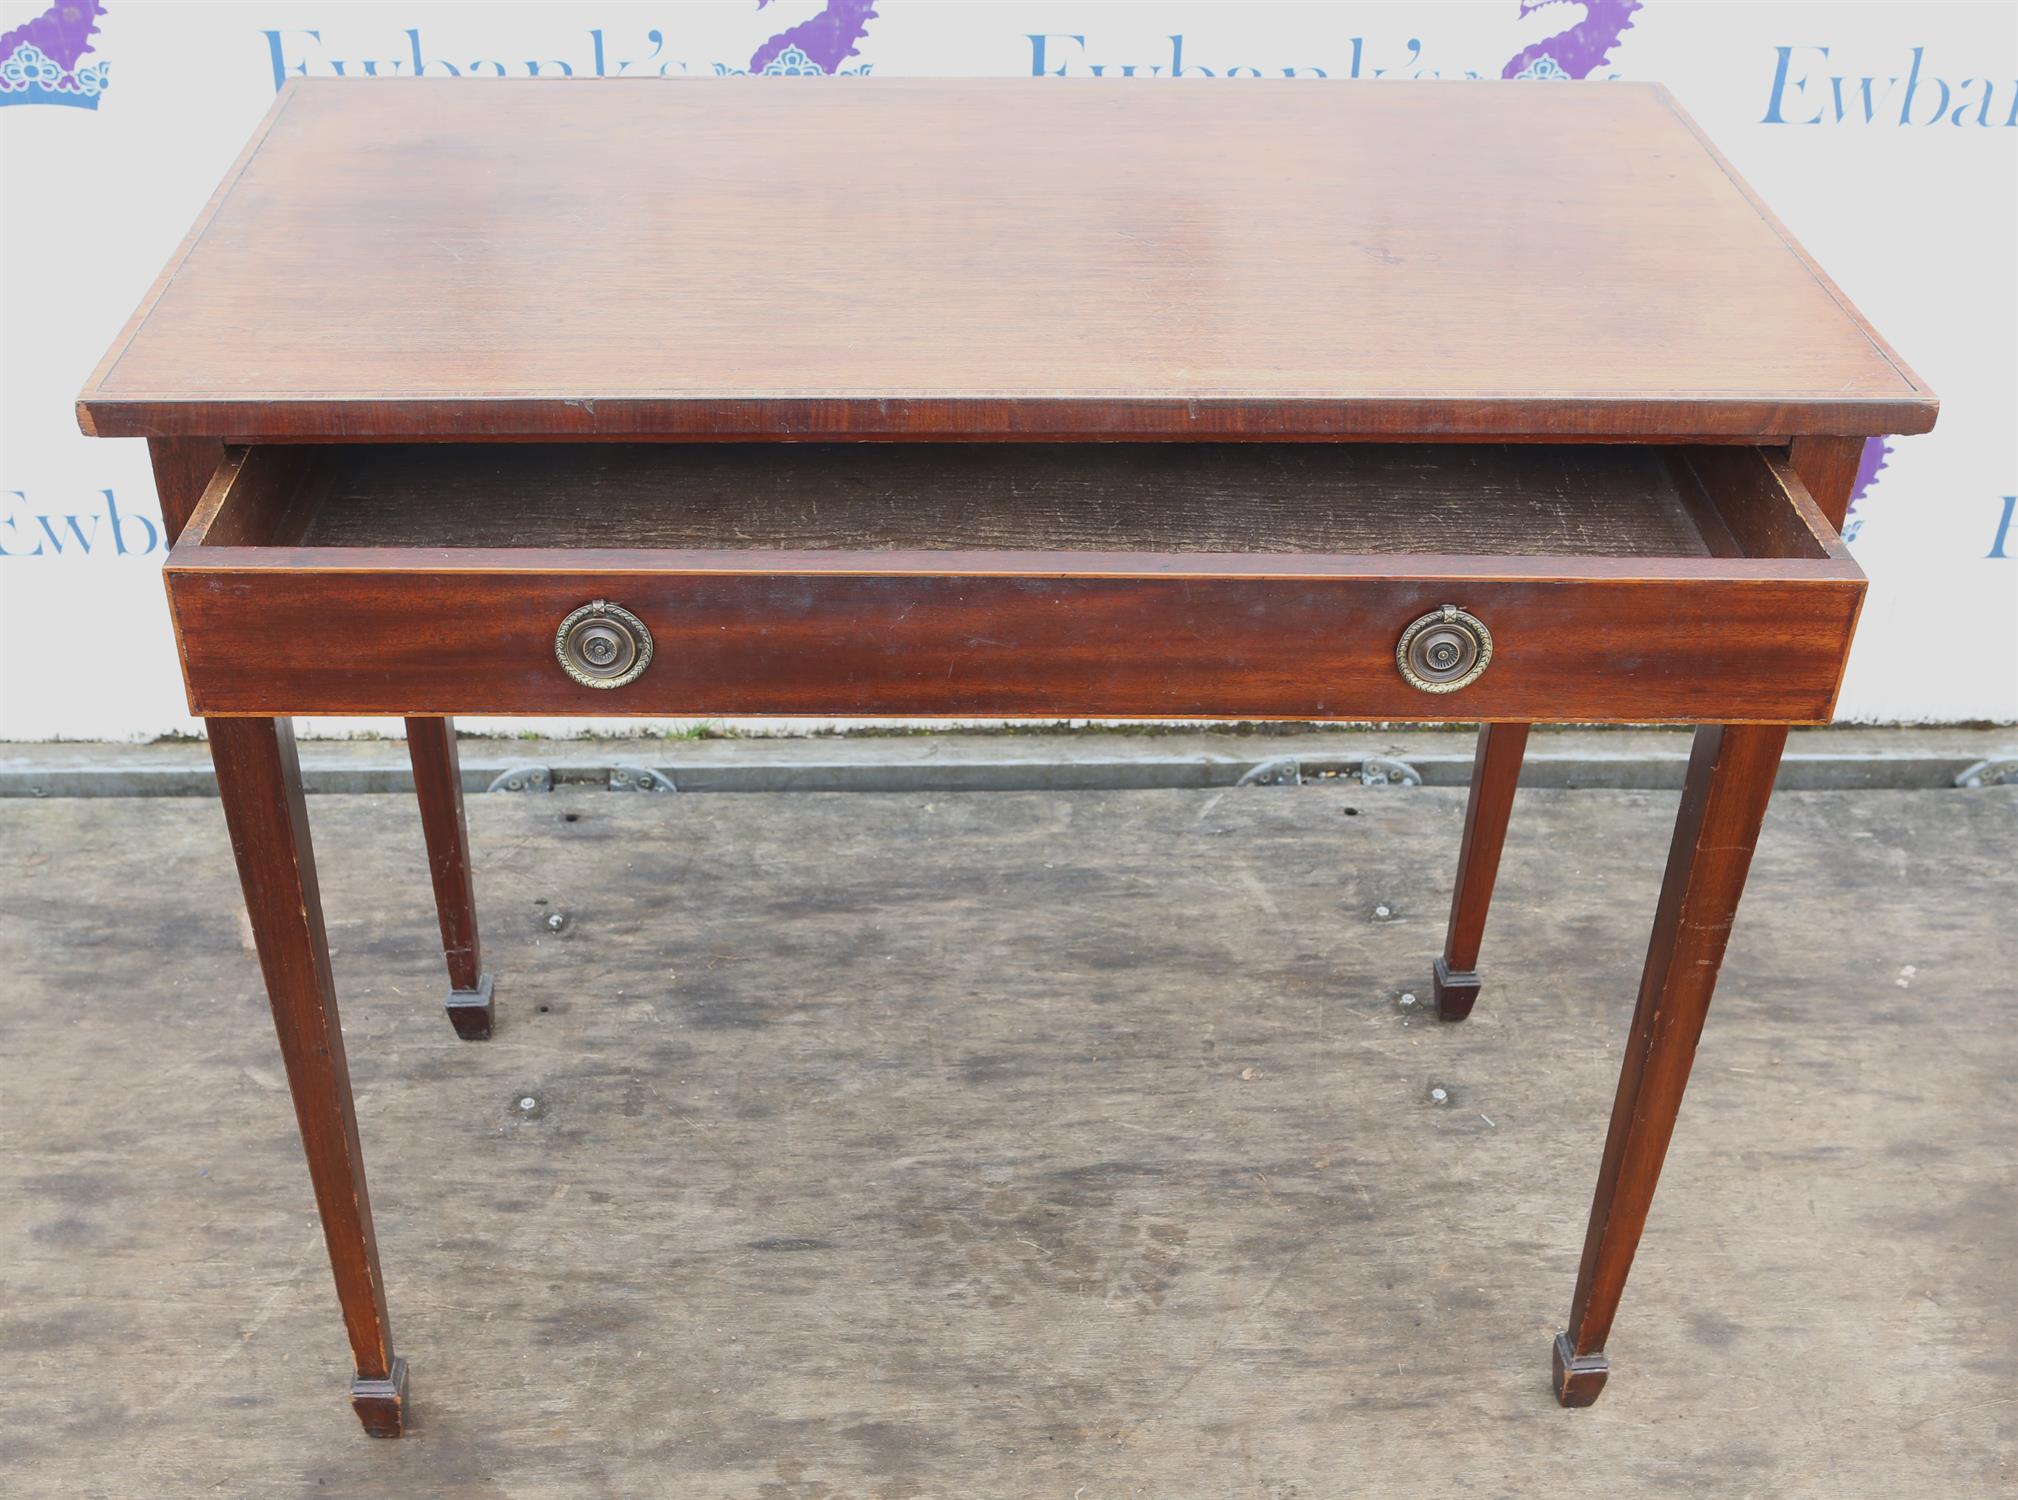 Mahogany and crossbanded rectangular table, 19th Century, with single long drawer, - Image 2 of 2